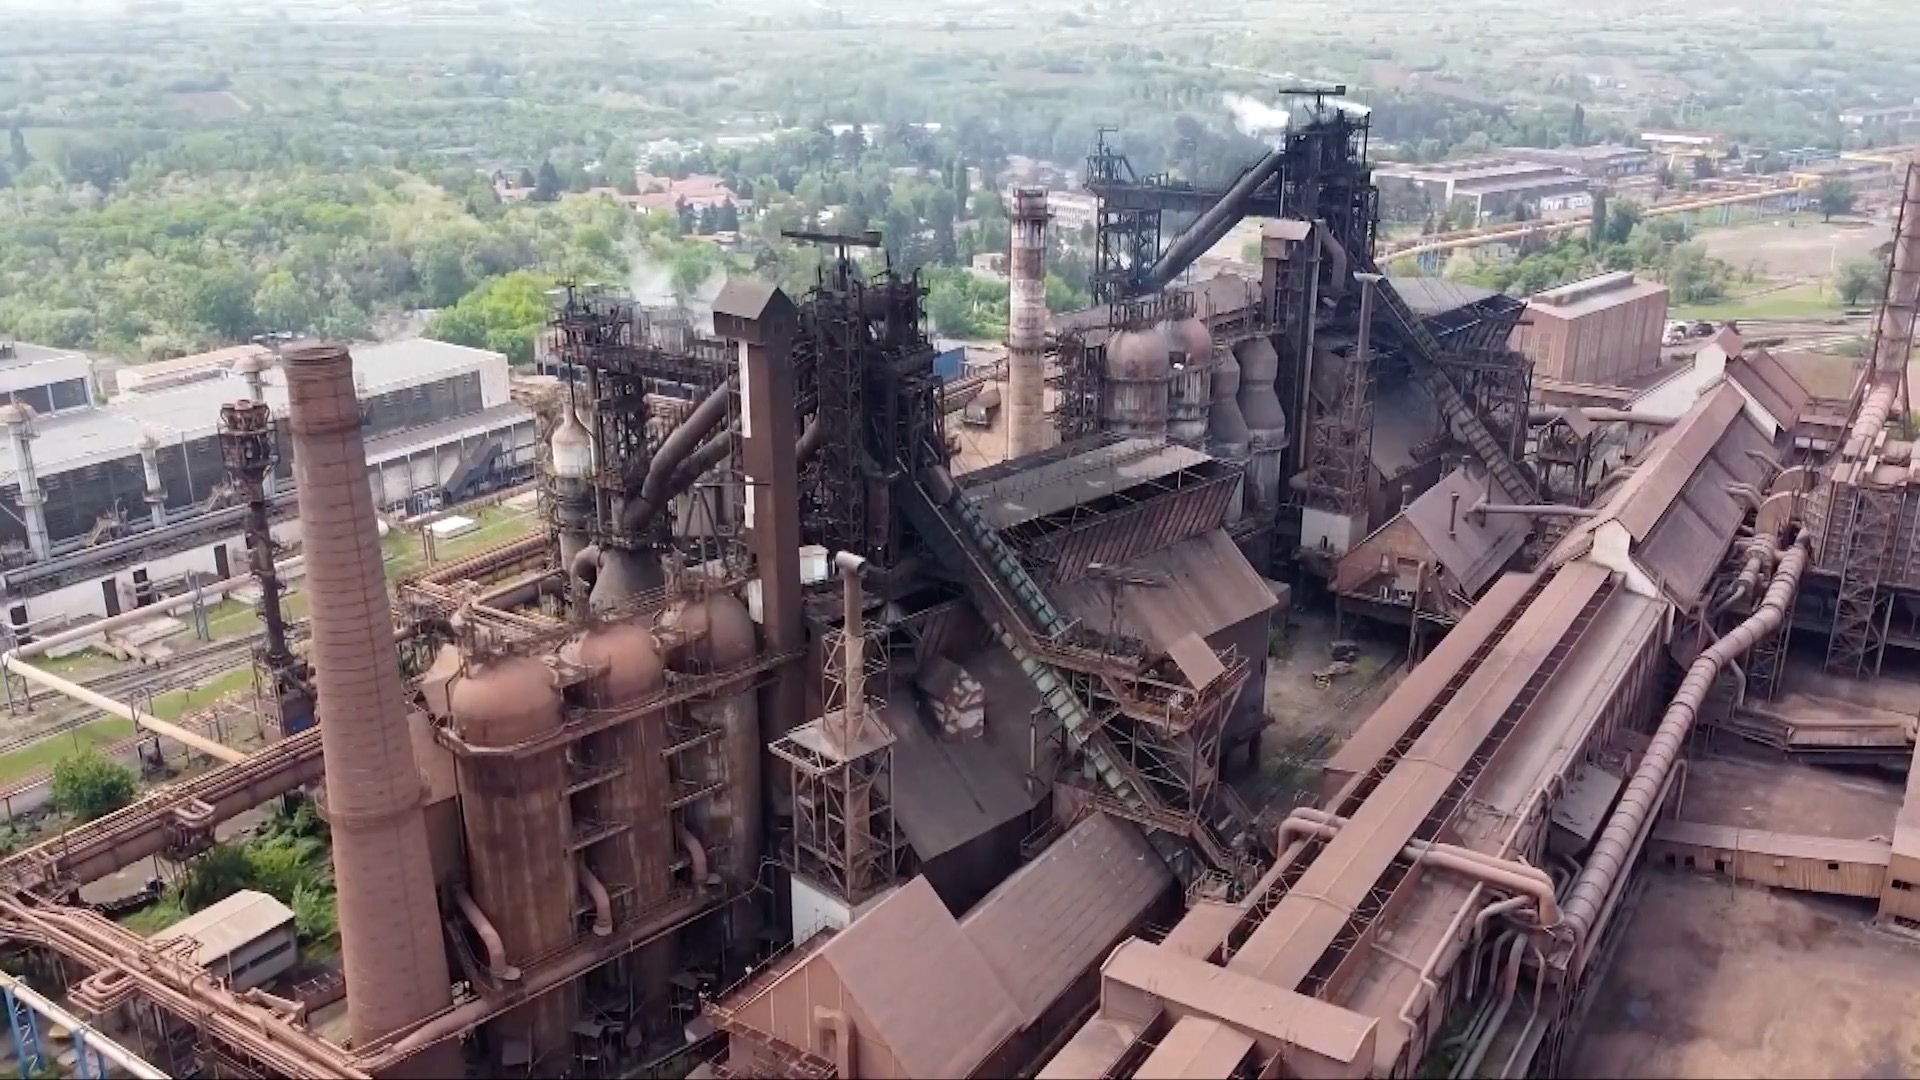 BRI breathes new life into old Serbian steel plant